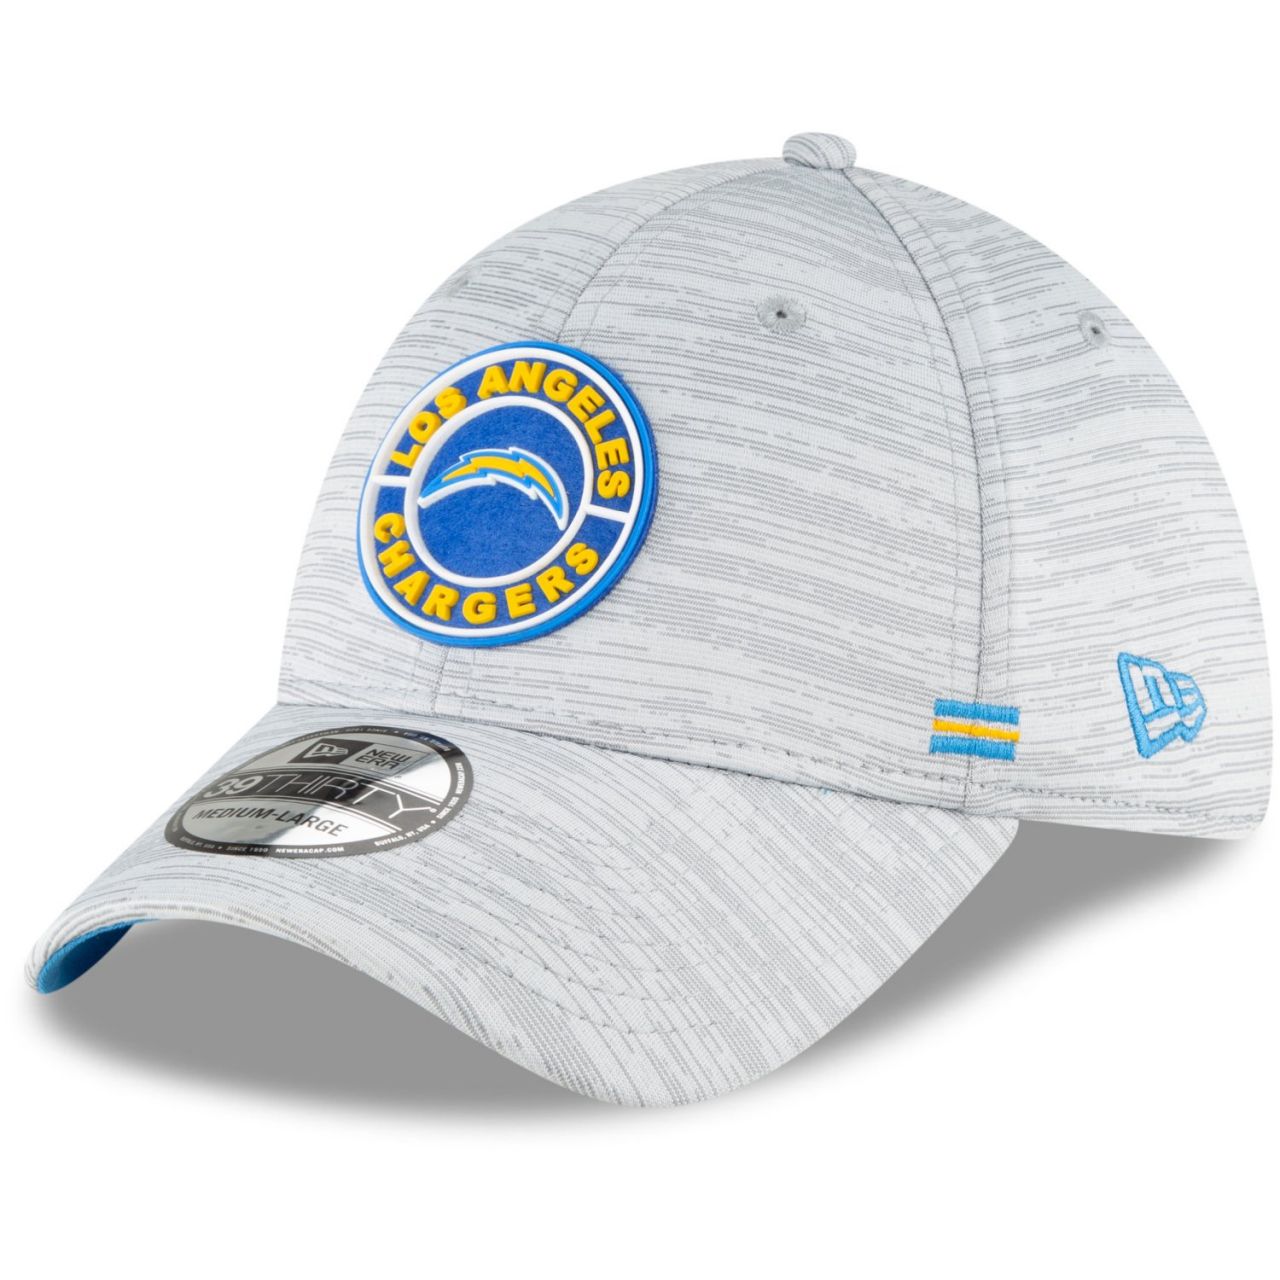 amfoo - New Era 39Thirty Cap - SIDELINE 2020 Los Angeles Chargers